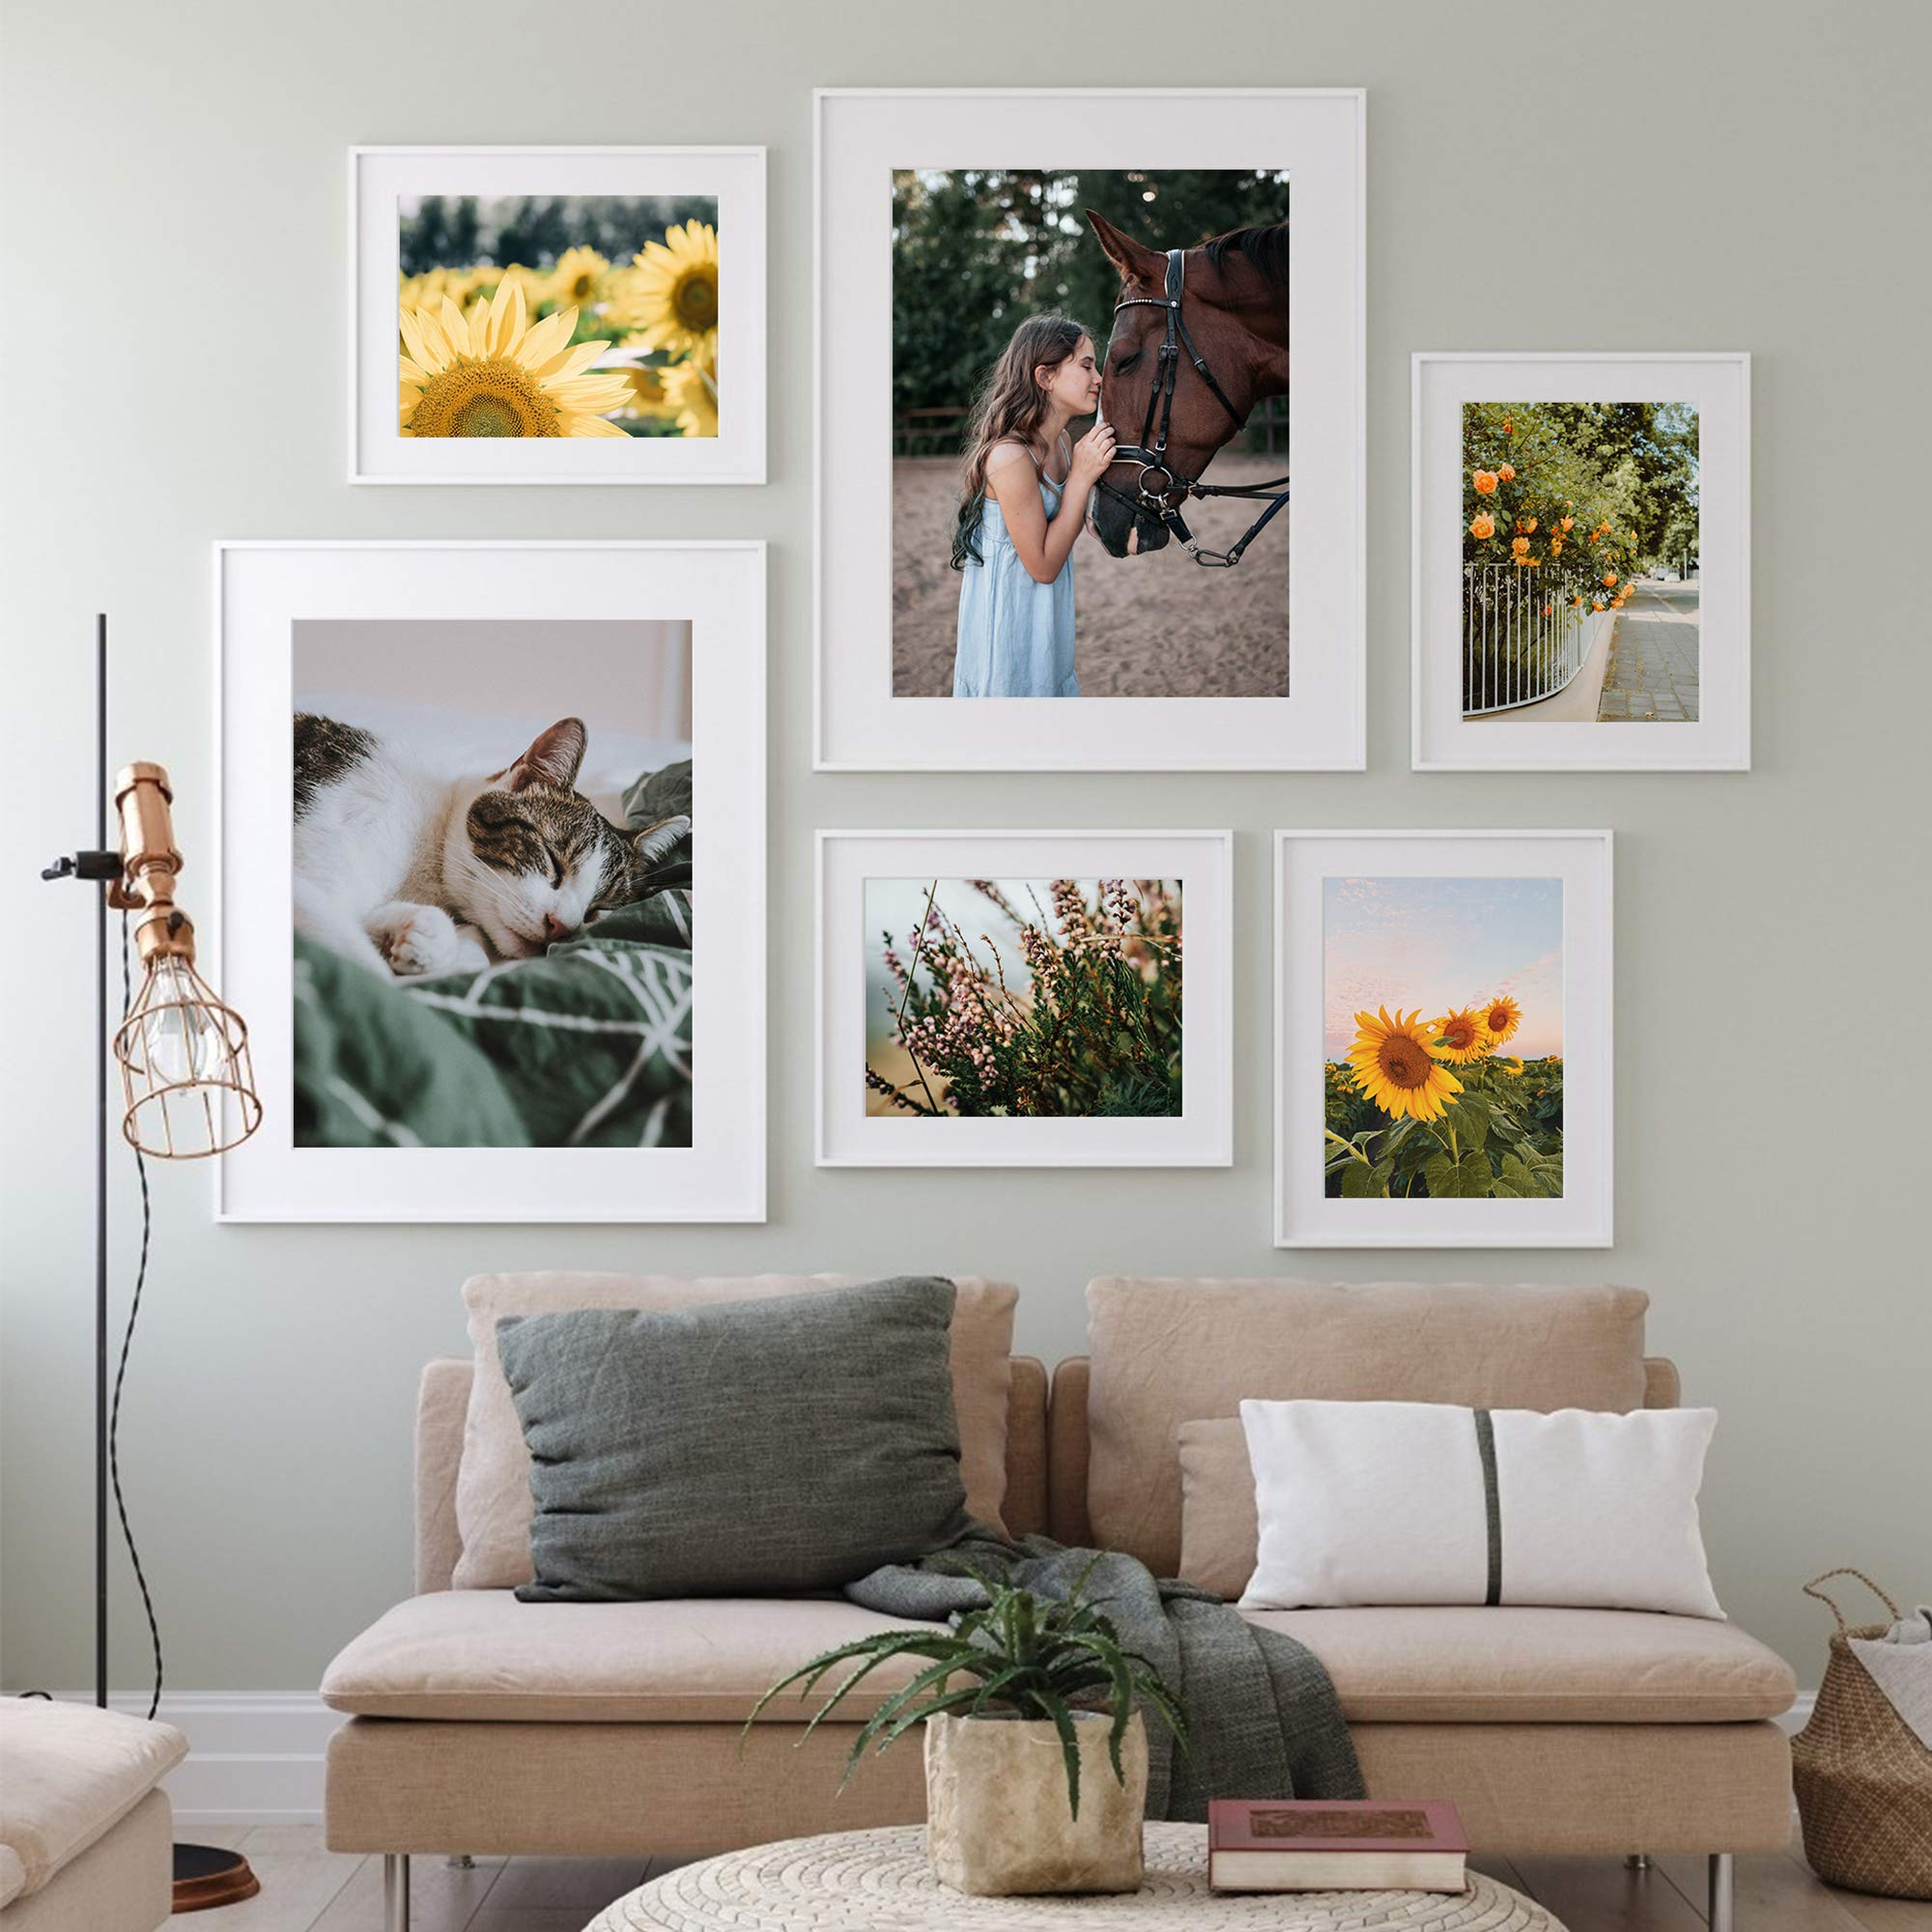 8x10 Floating Frames for Home or Office Decor 